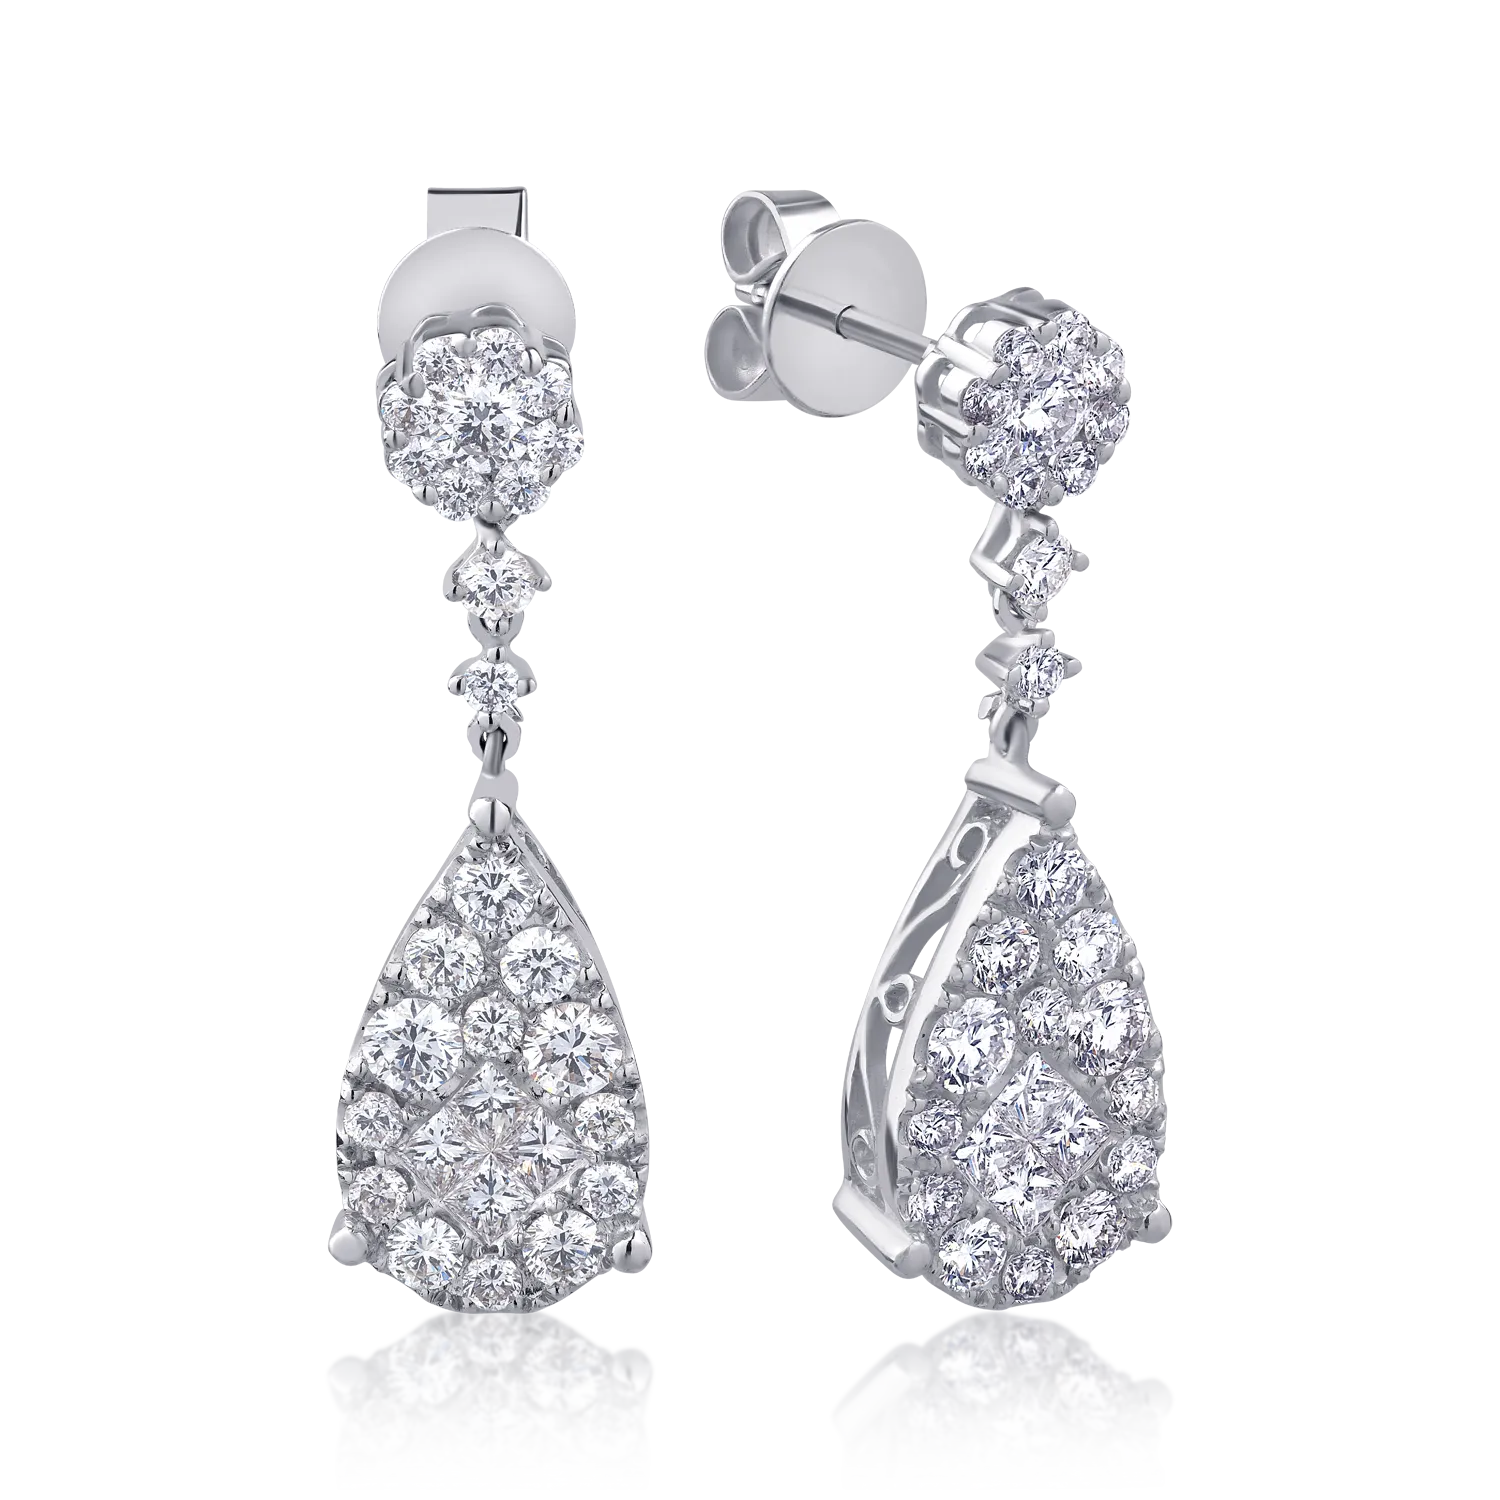 18K white gold earrings with 2.04ct diamonds